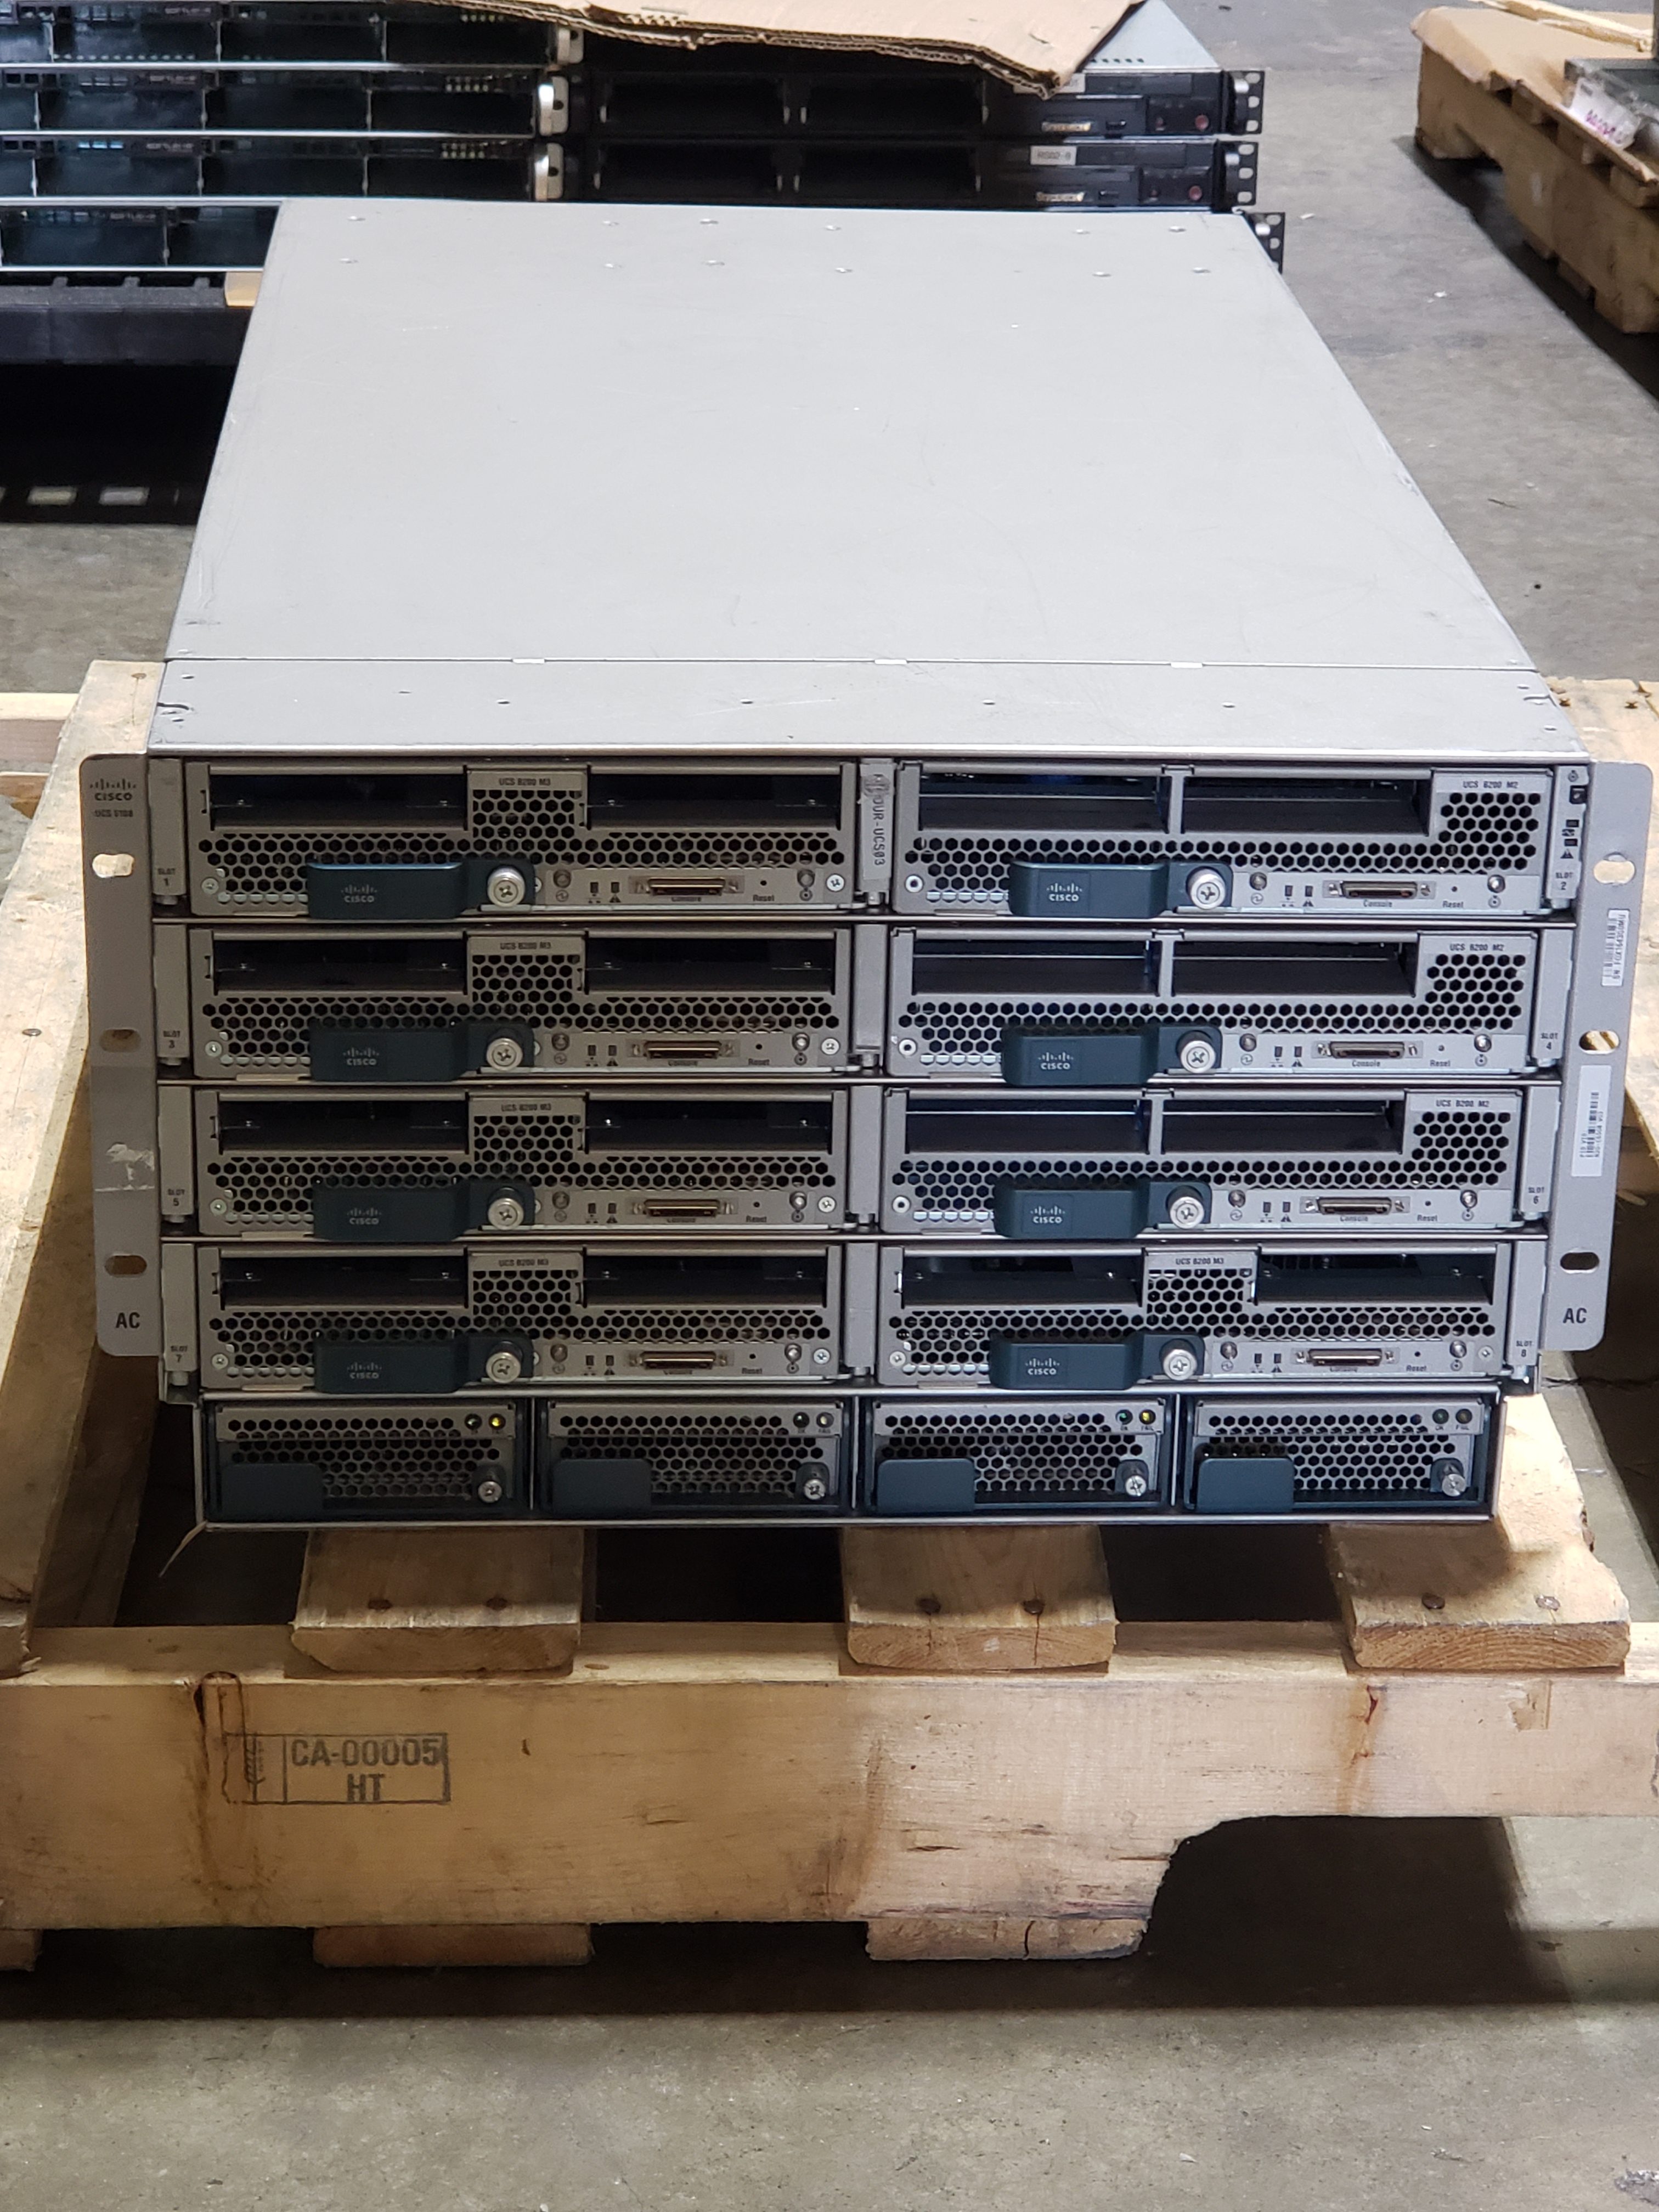 Cisco UCS N20-C6508 5108 Blade Chassis 